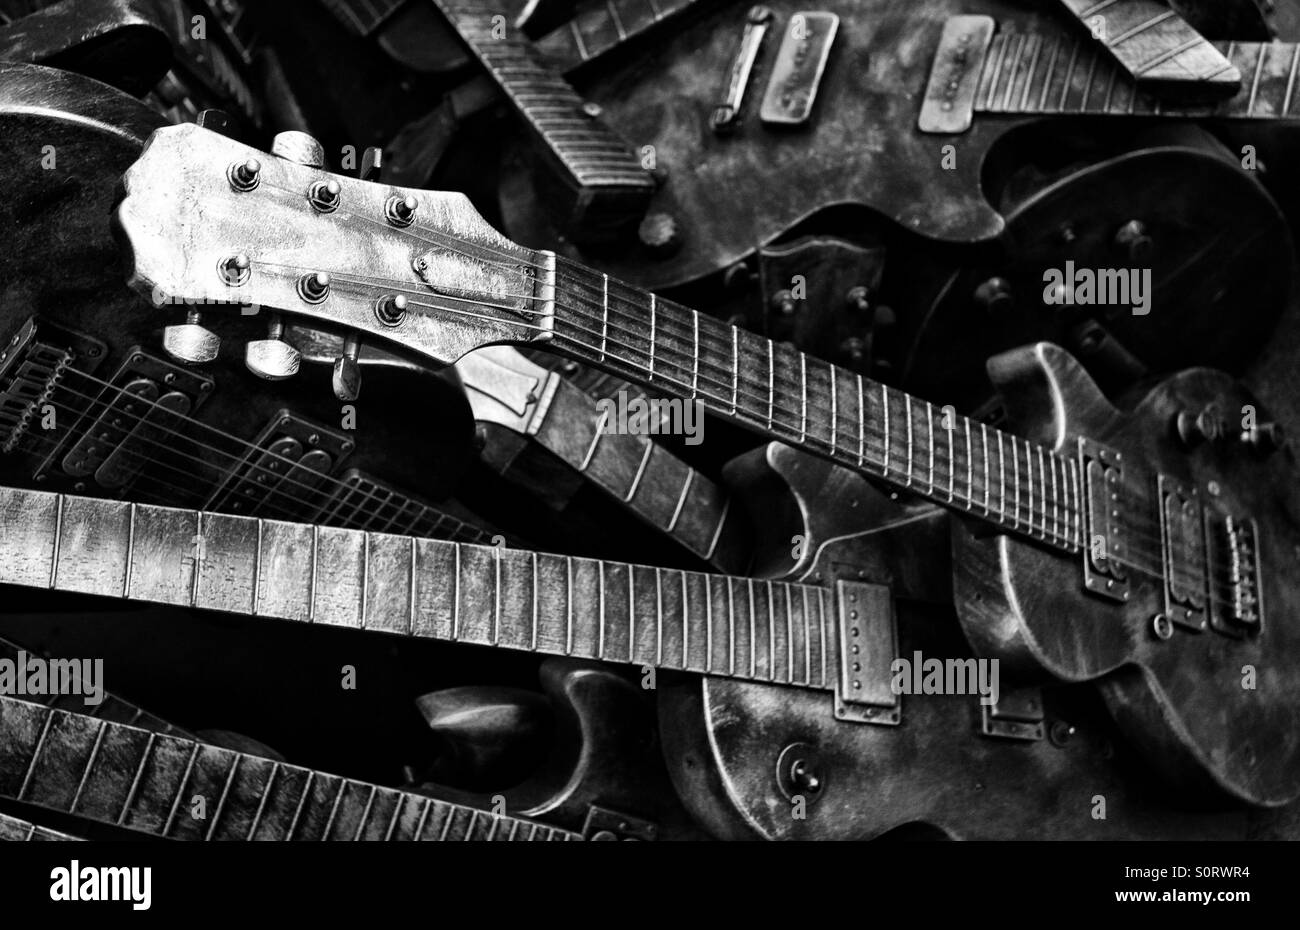 A pile of unused metallic guitars with a black and white, monochrome hue. Stock Photo